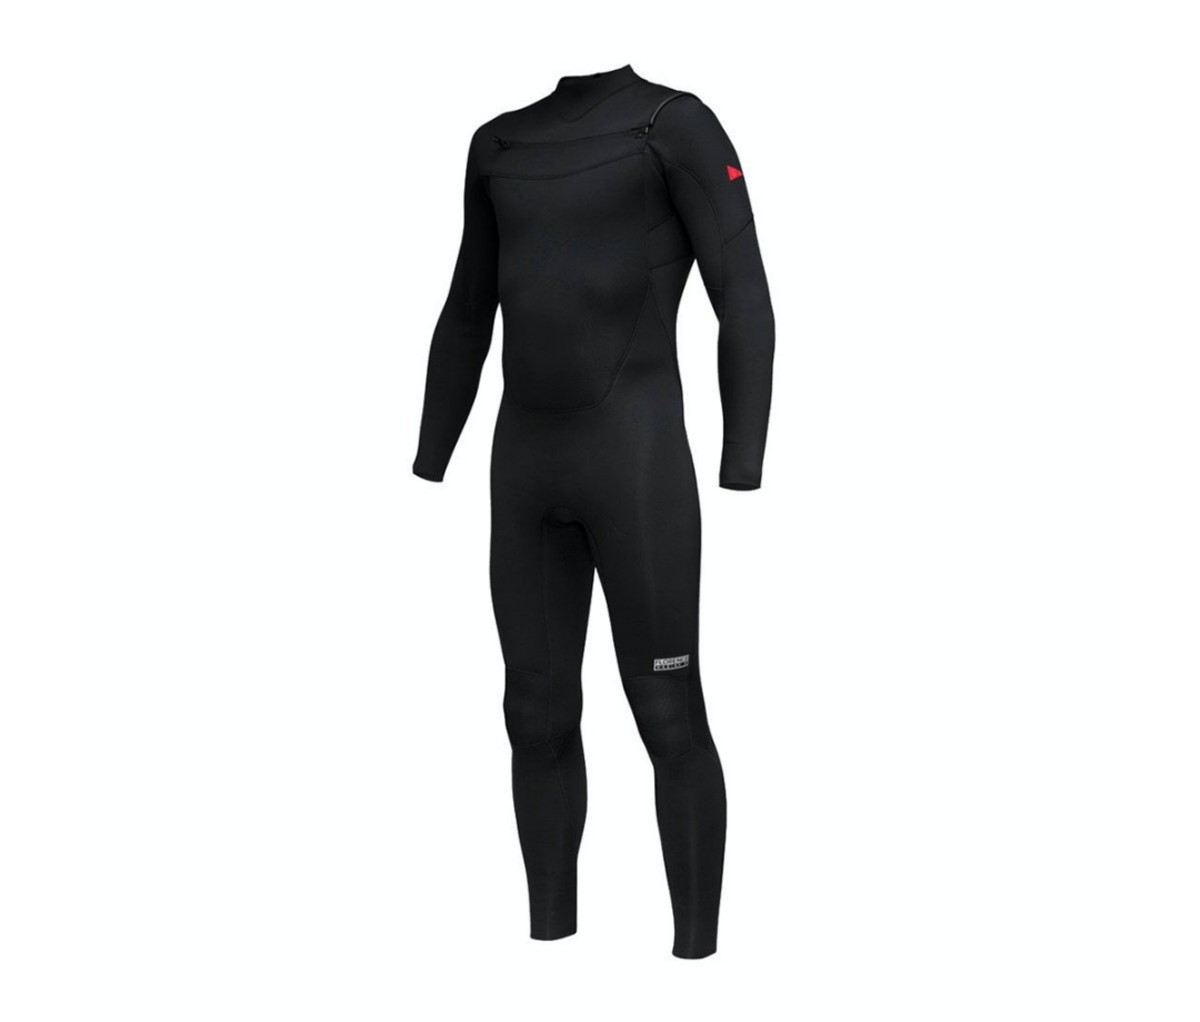 Florence Marine X 3/2mm Full Suit